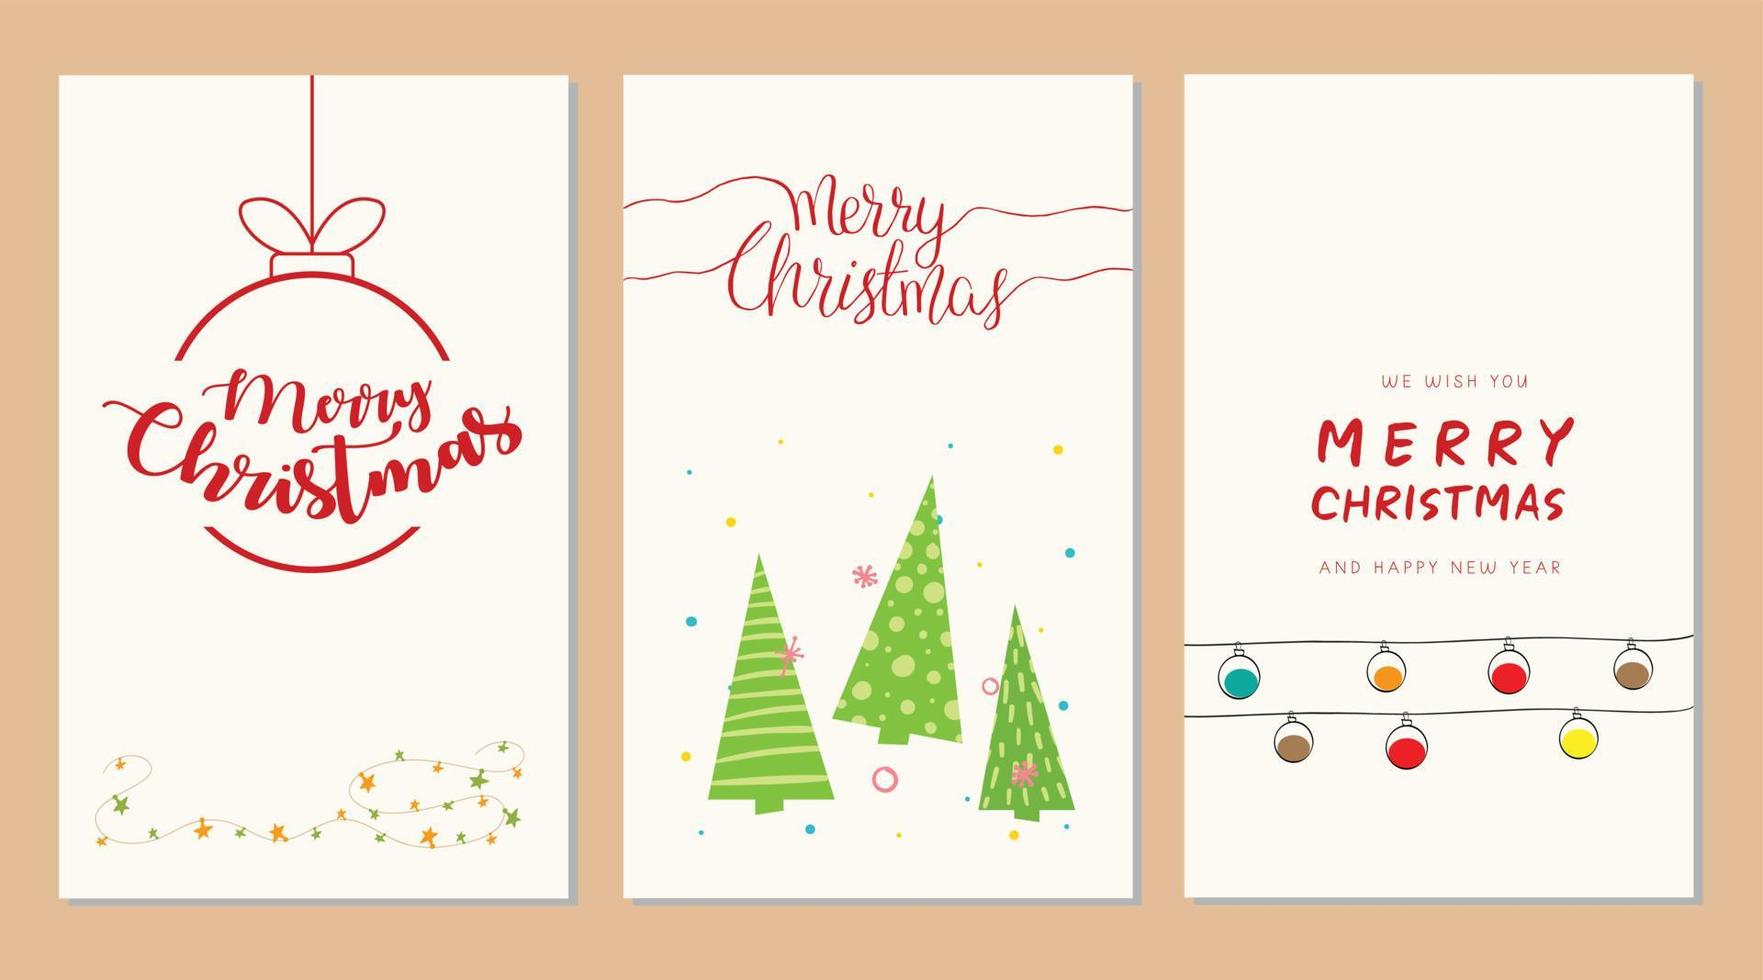 Christmas cards design set with Christmas tree, Vector illustration